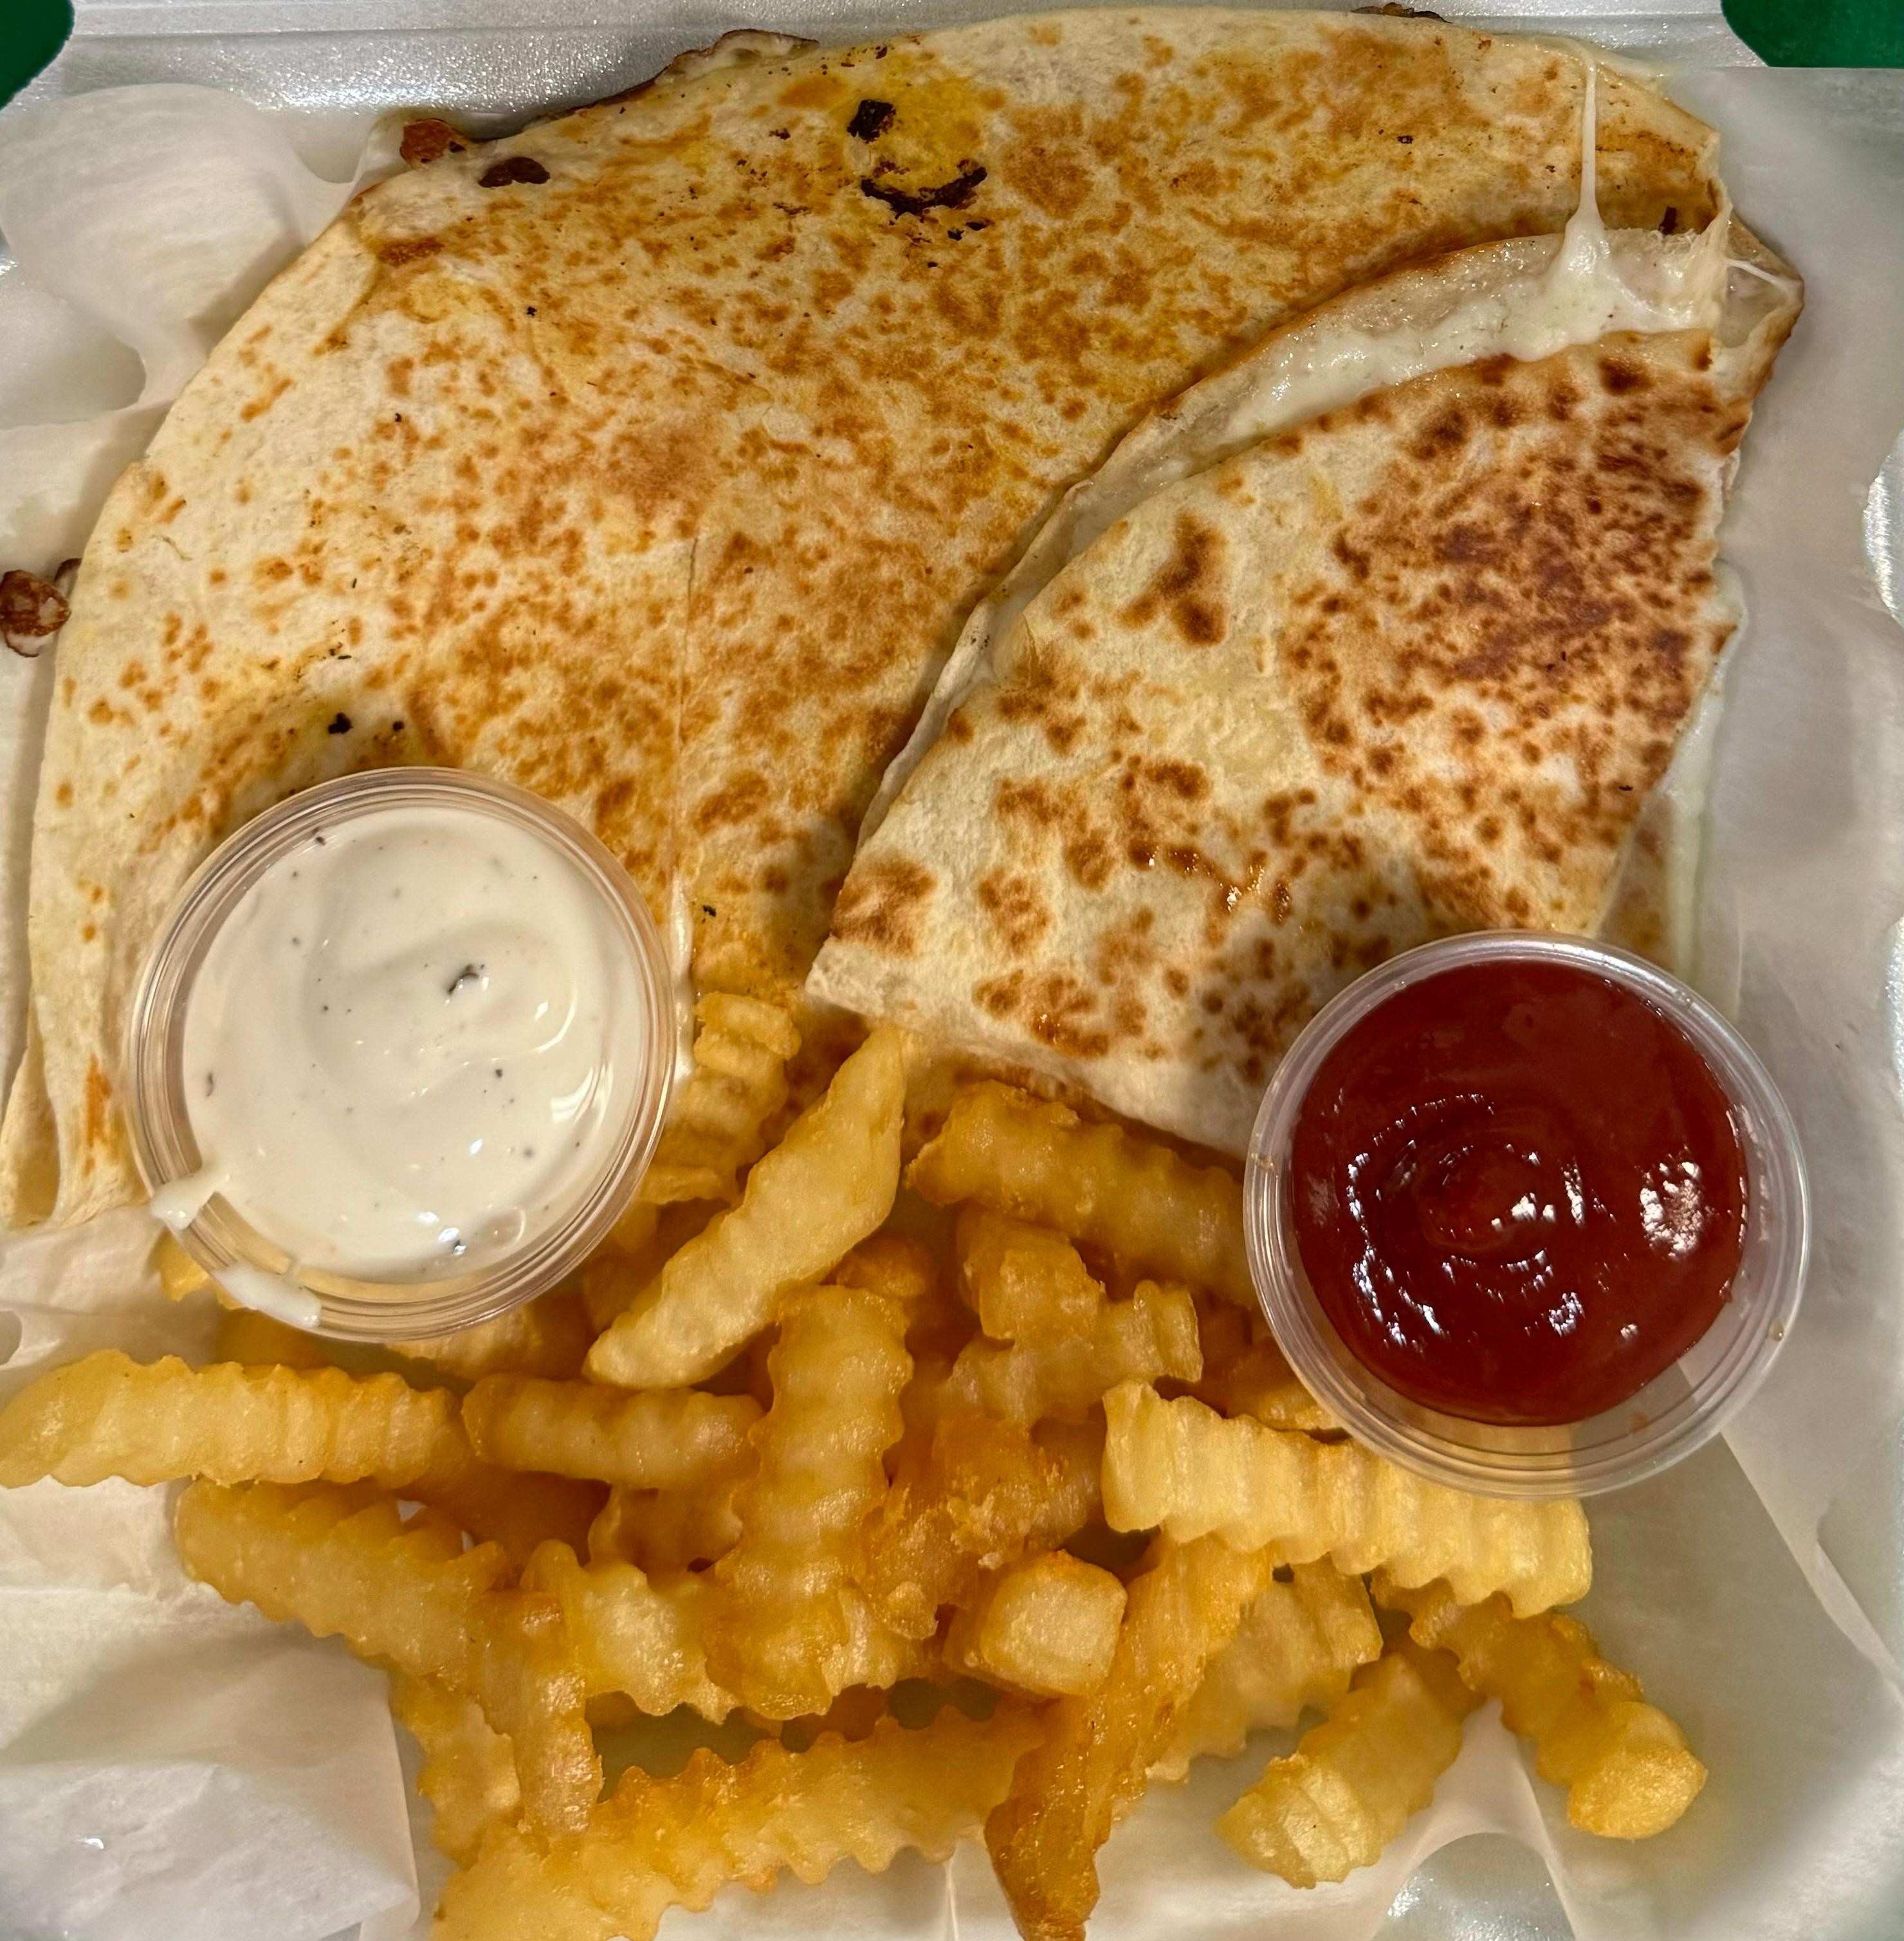 Cheese quesadilla with French fries